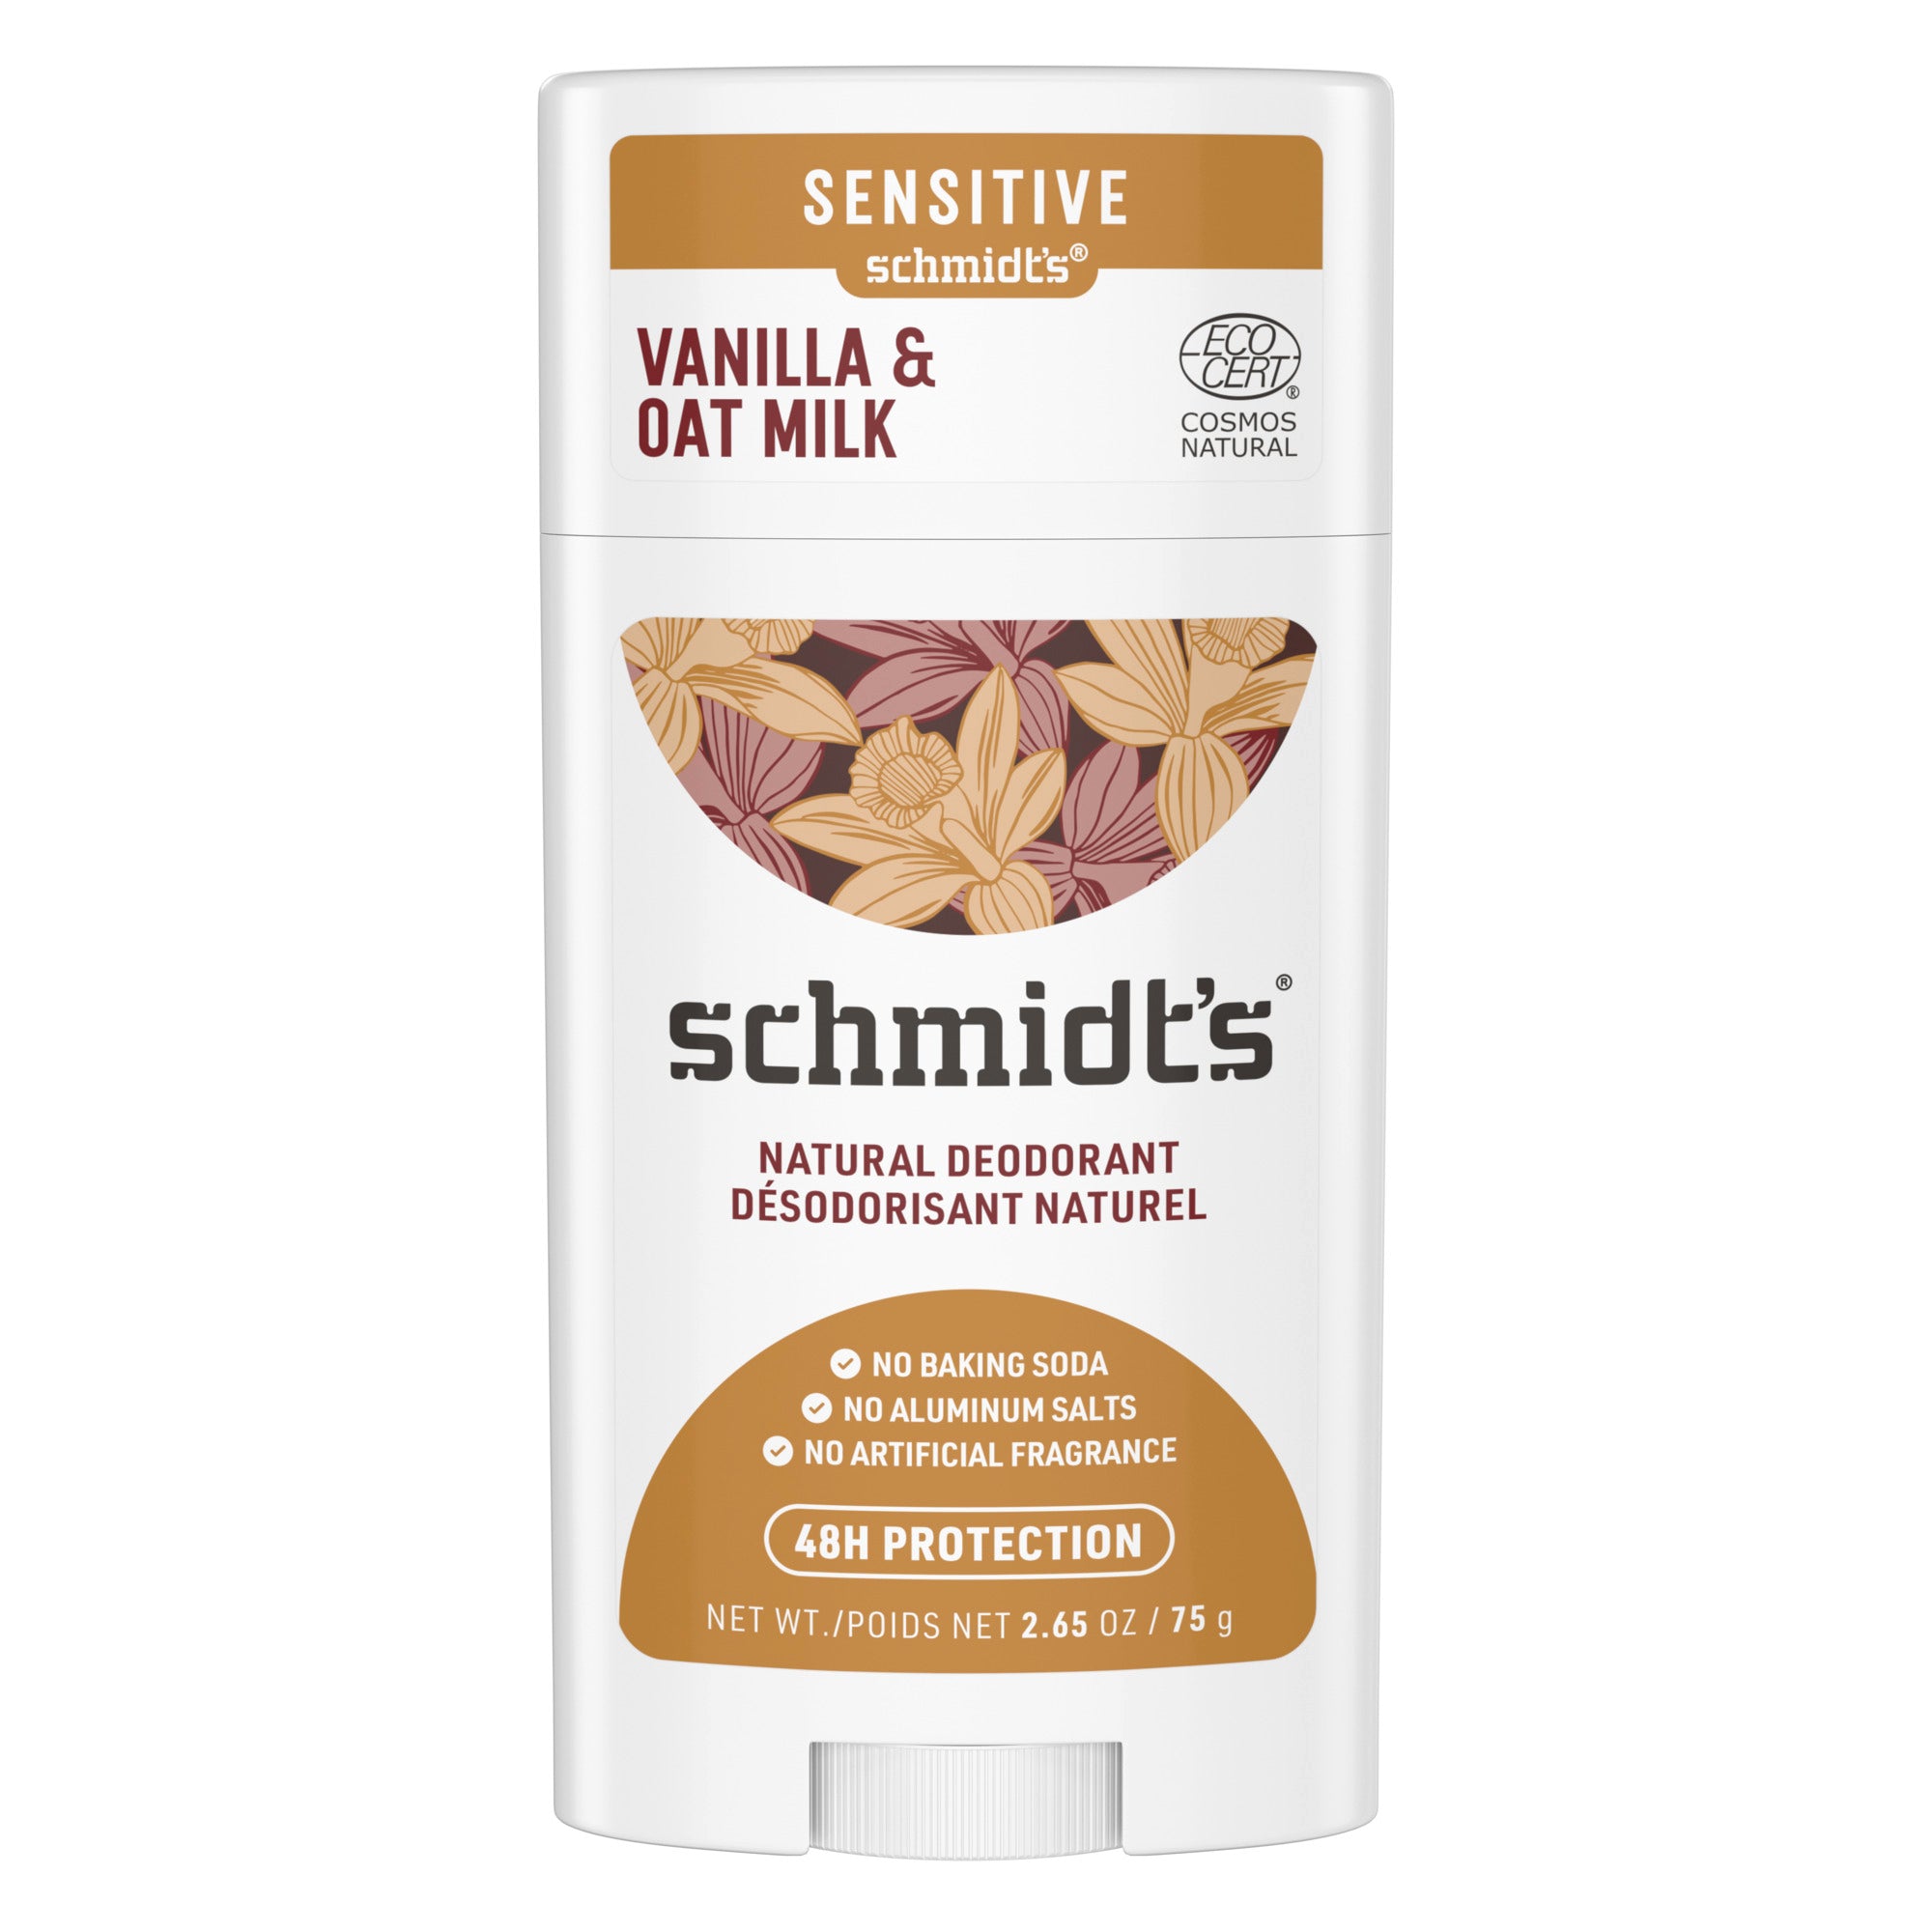 Showing the front angle view of the Schmidt's Oat Milk & Vanilla 48h Natural Deodorant 75g product.